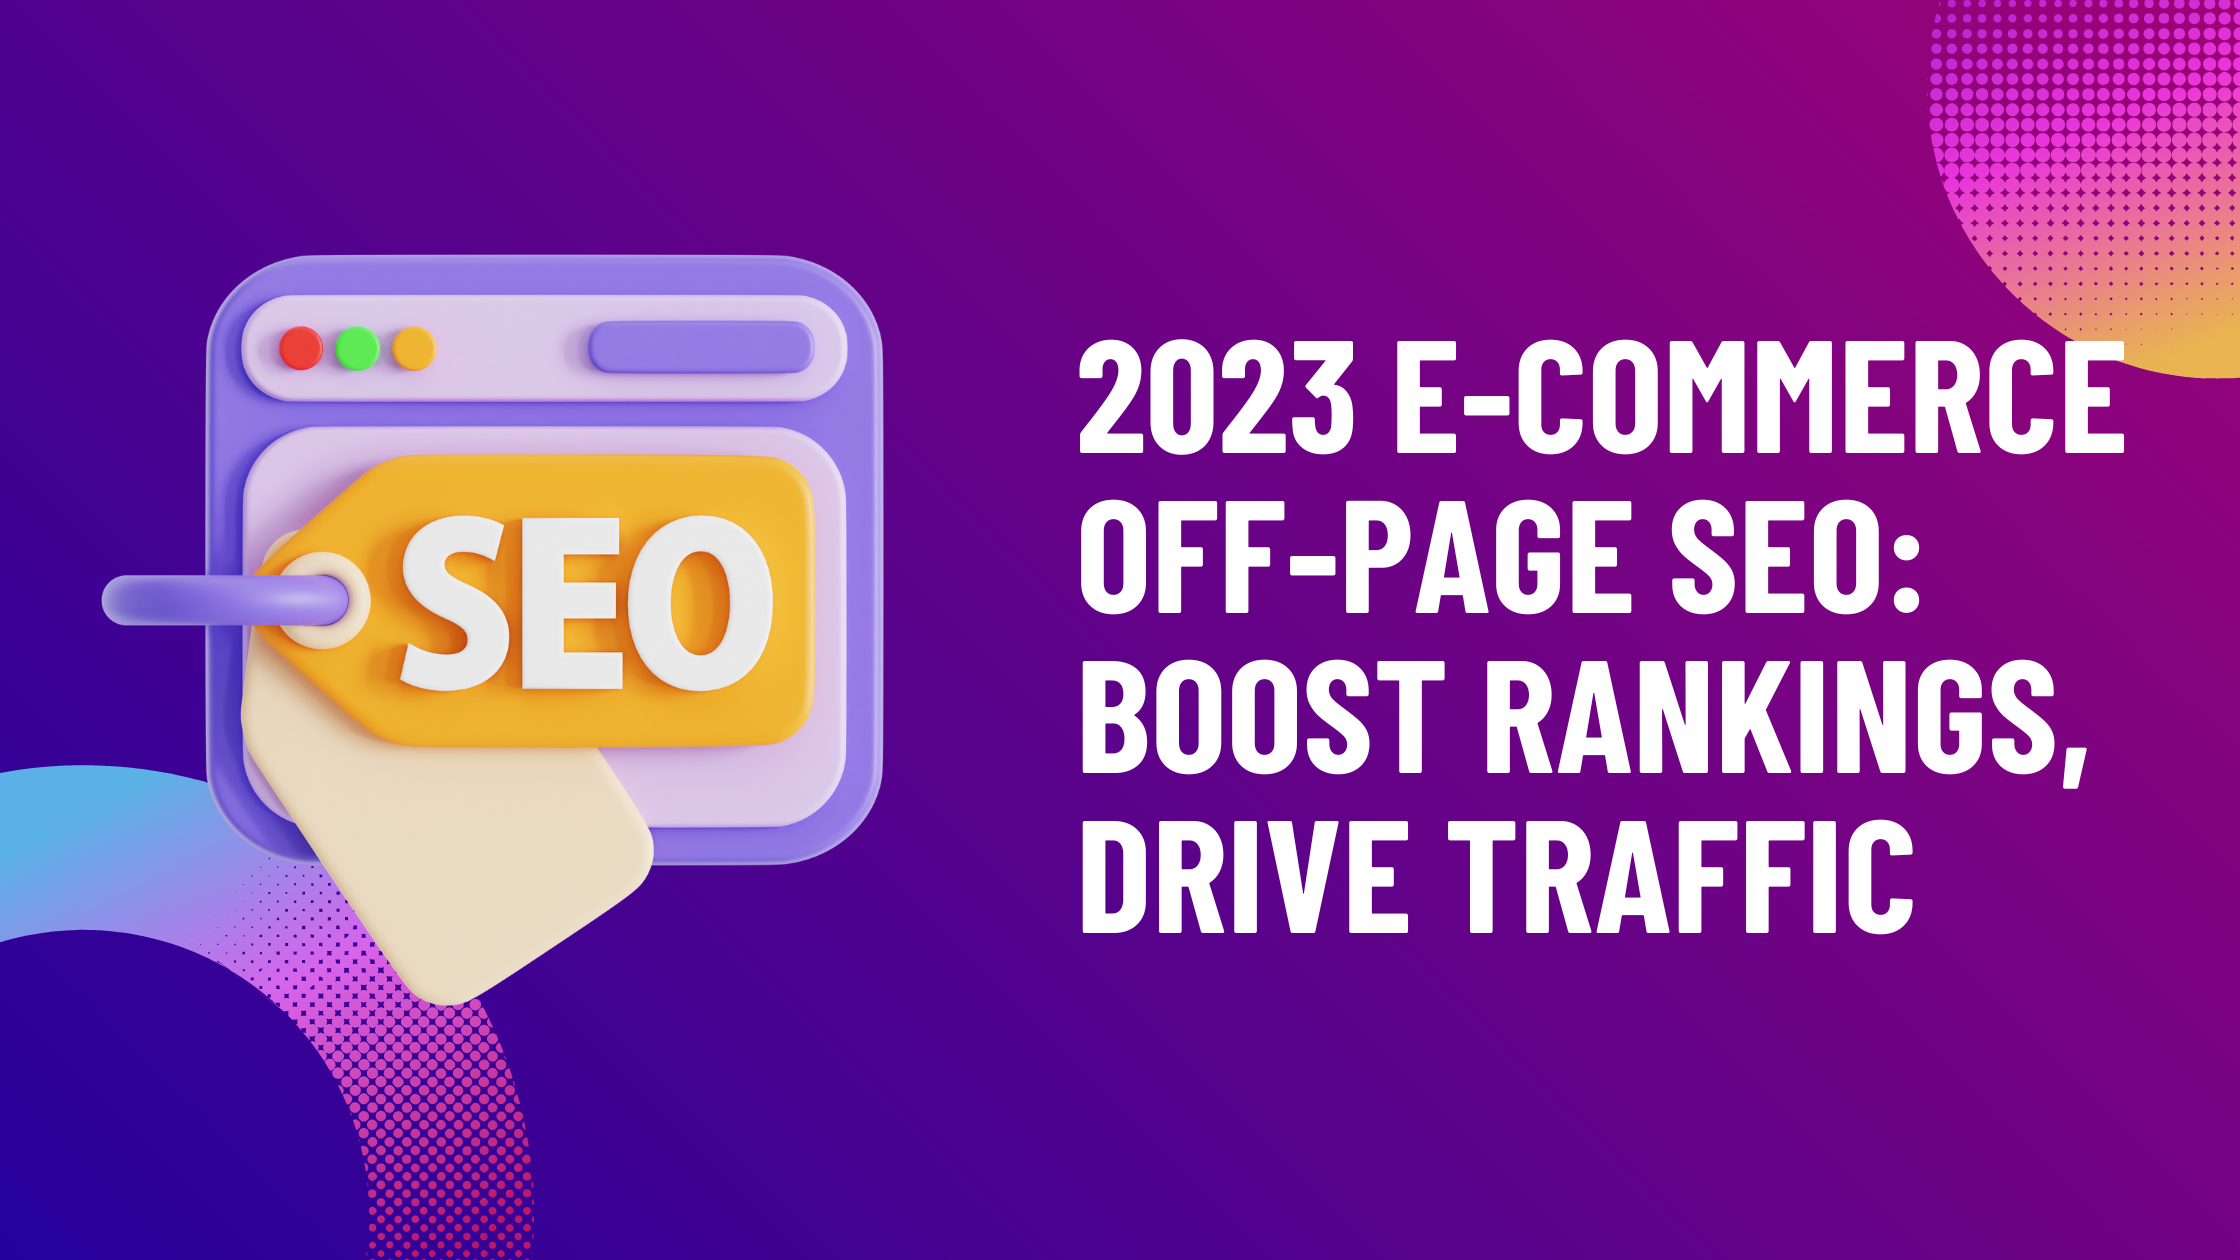 off page seo activities list 2023